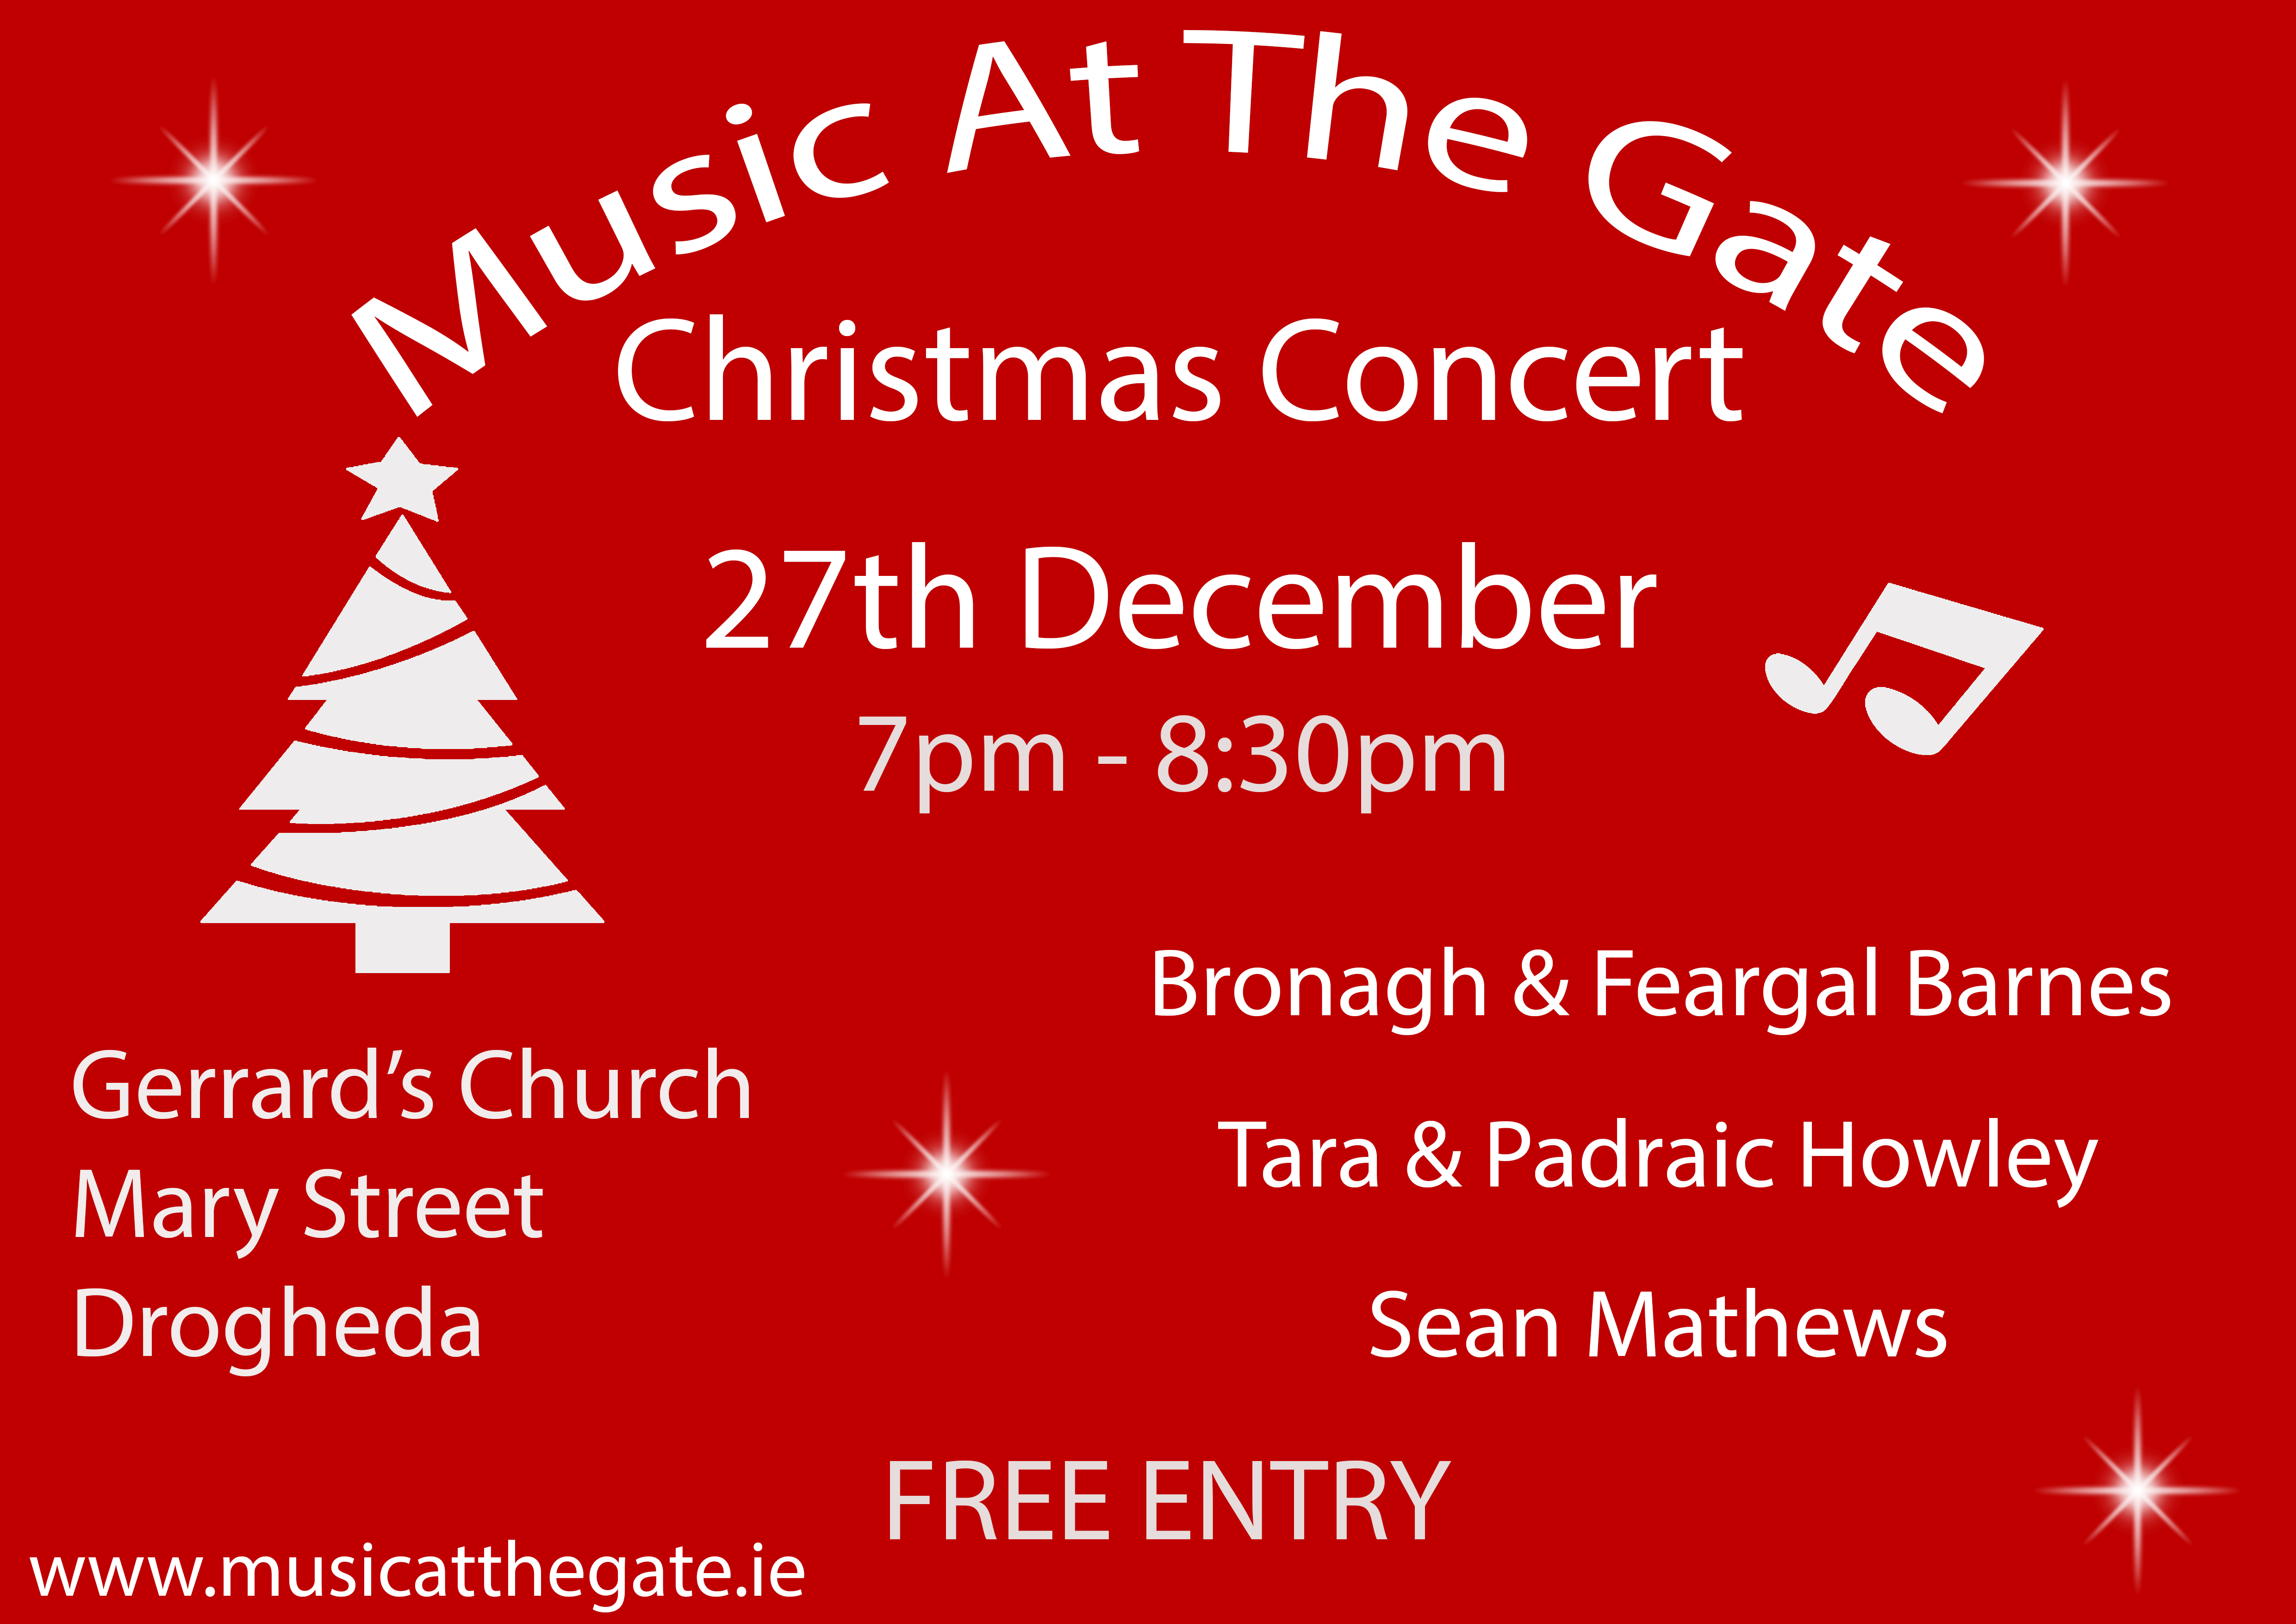 Click here to read more details about the Christmas Concert in Gerrards Church, Mary's street on the 27th of December.